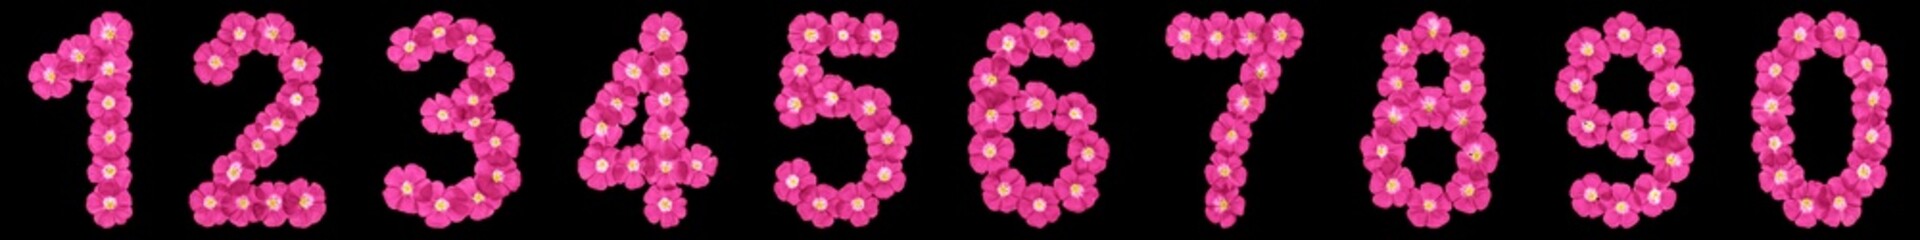 Set of arabic numbers, natural pinke flowers of flax, isolated on black background